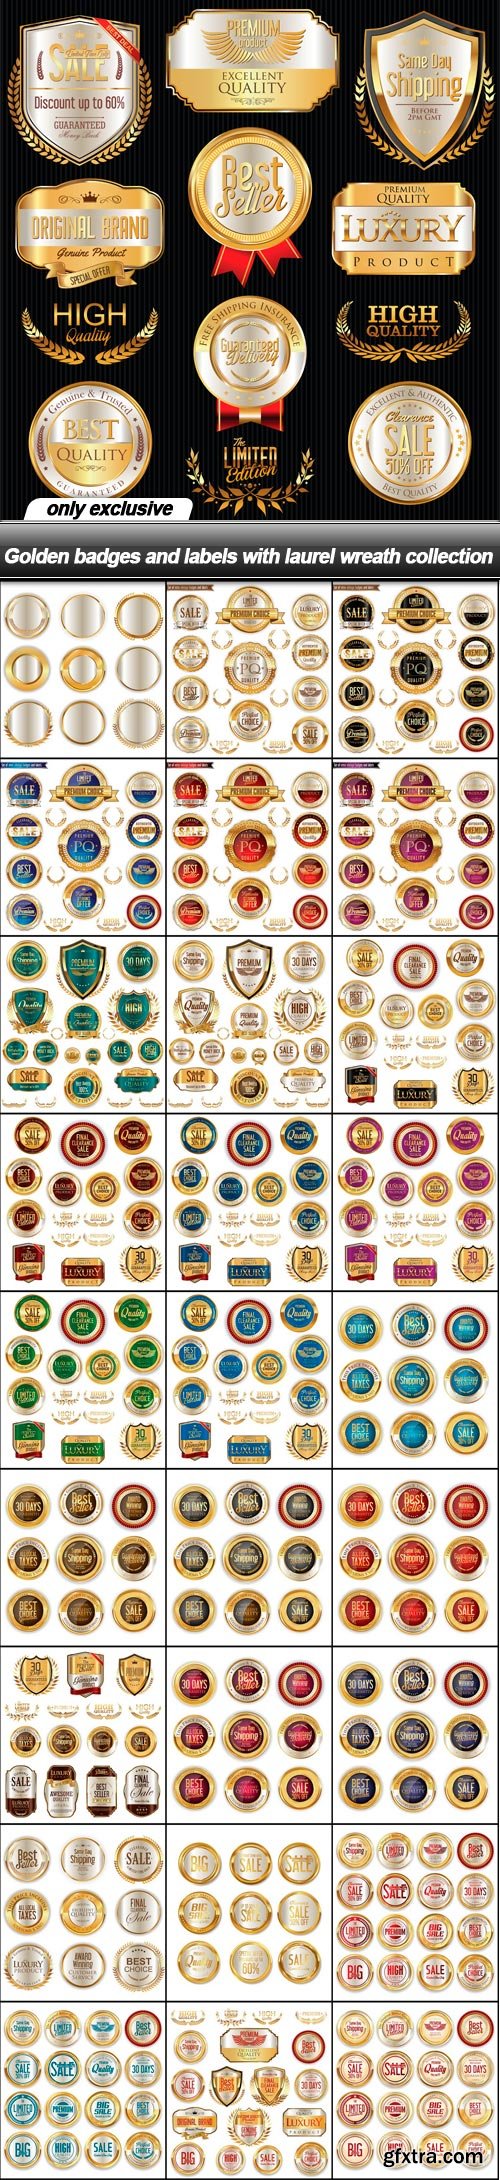 Golden badges and labels with laurel wreath collection - 28 EPS